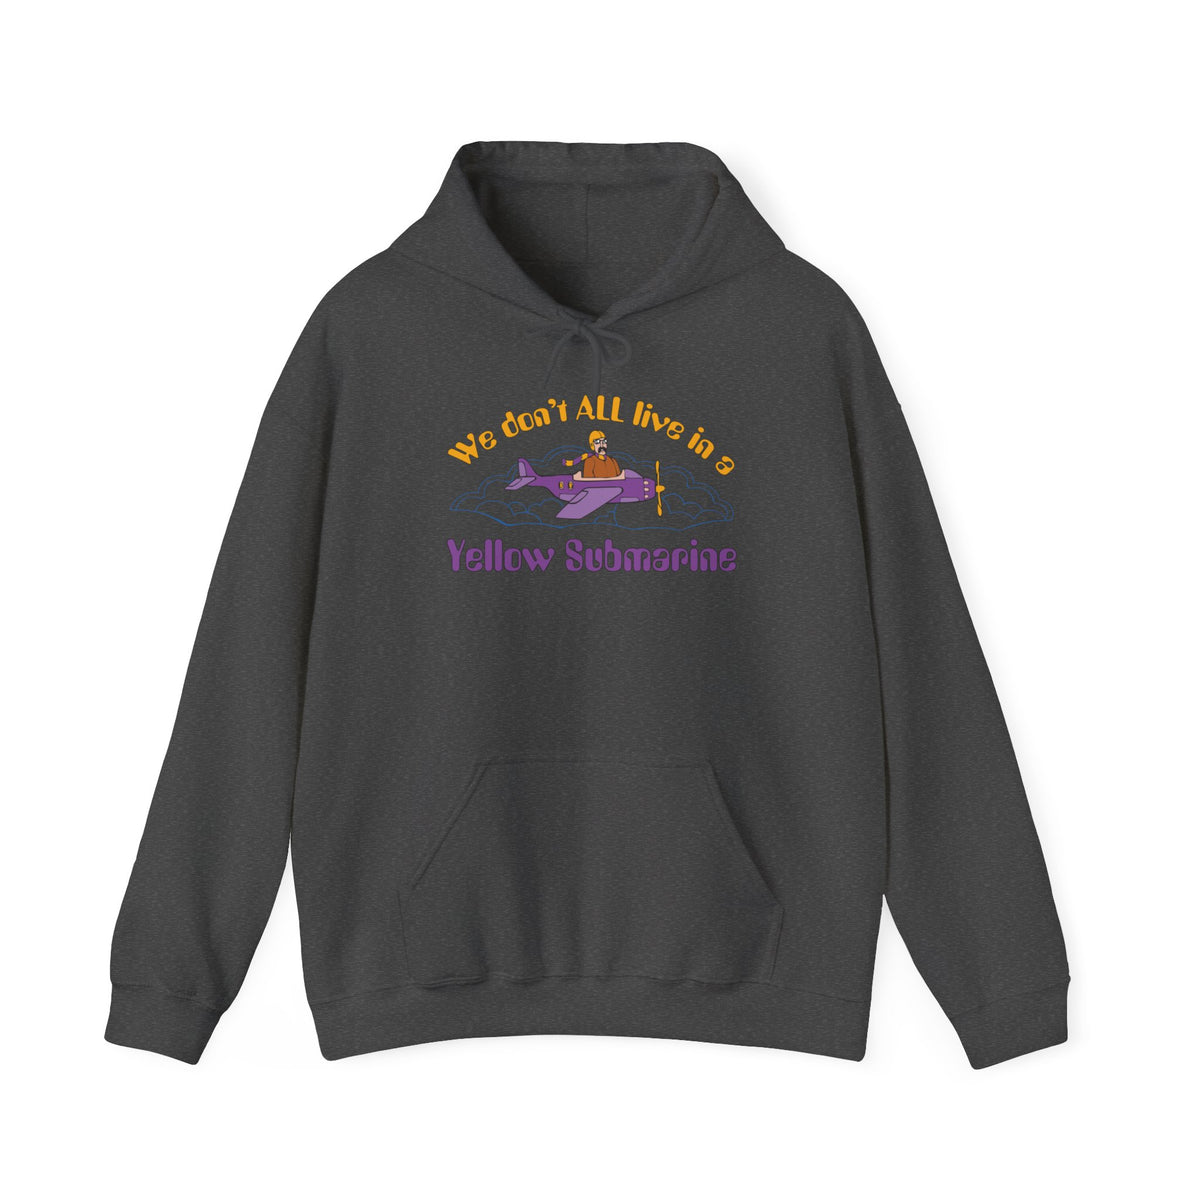 We Don't All Live In A Yellow Submarine - Hoodie